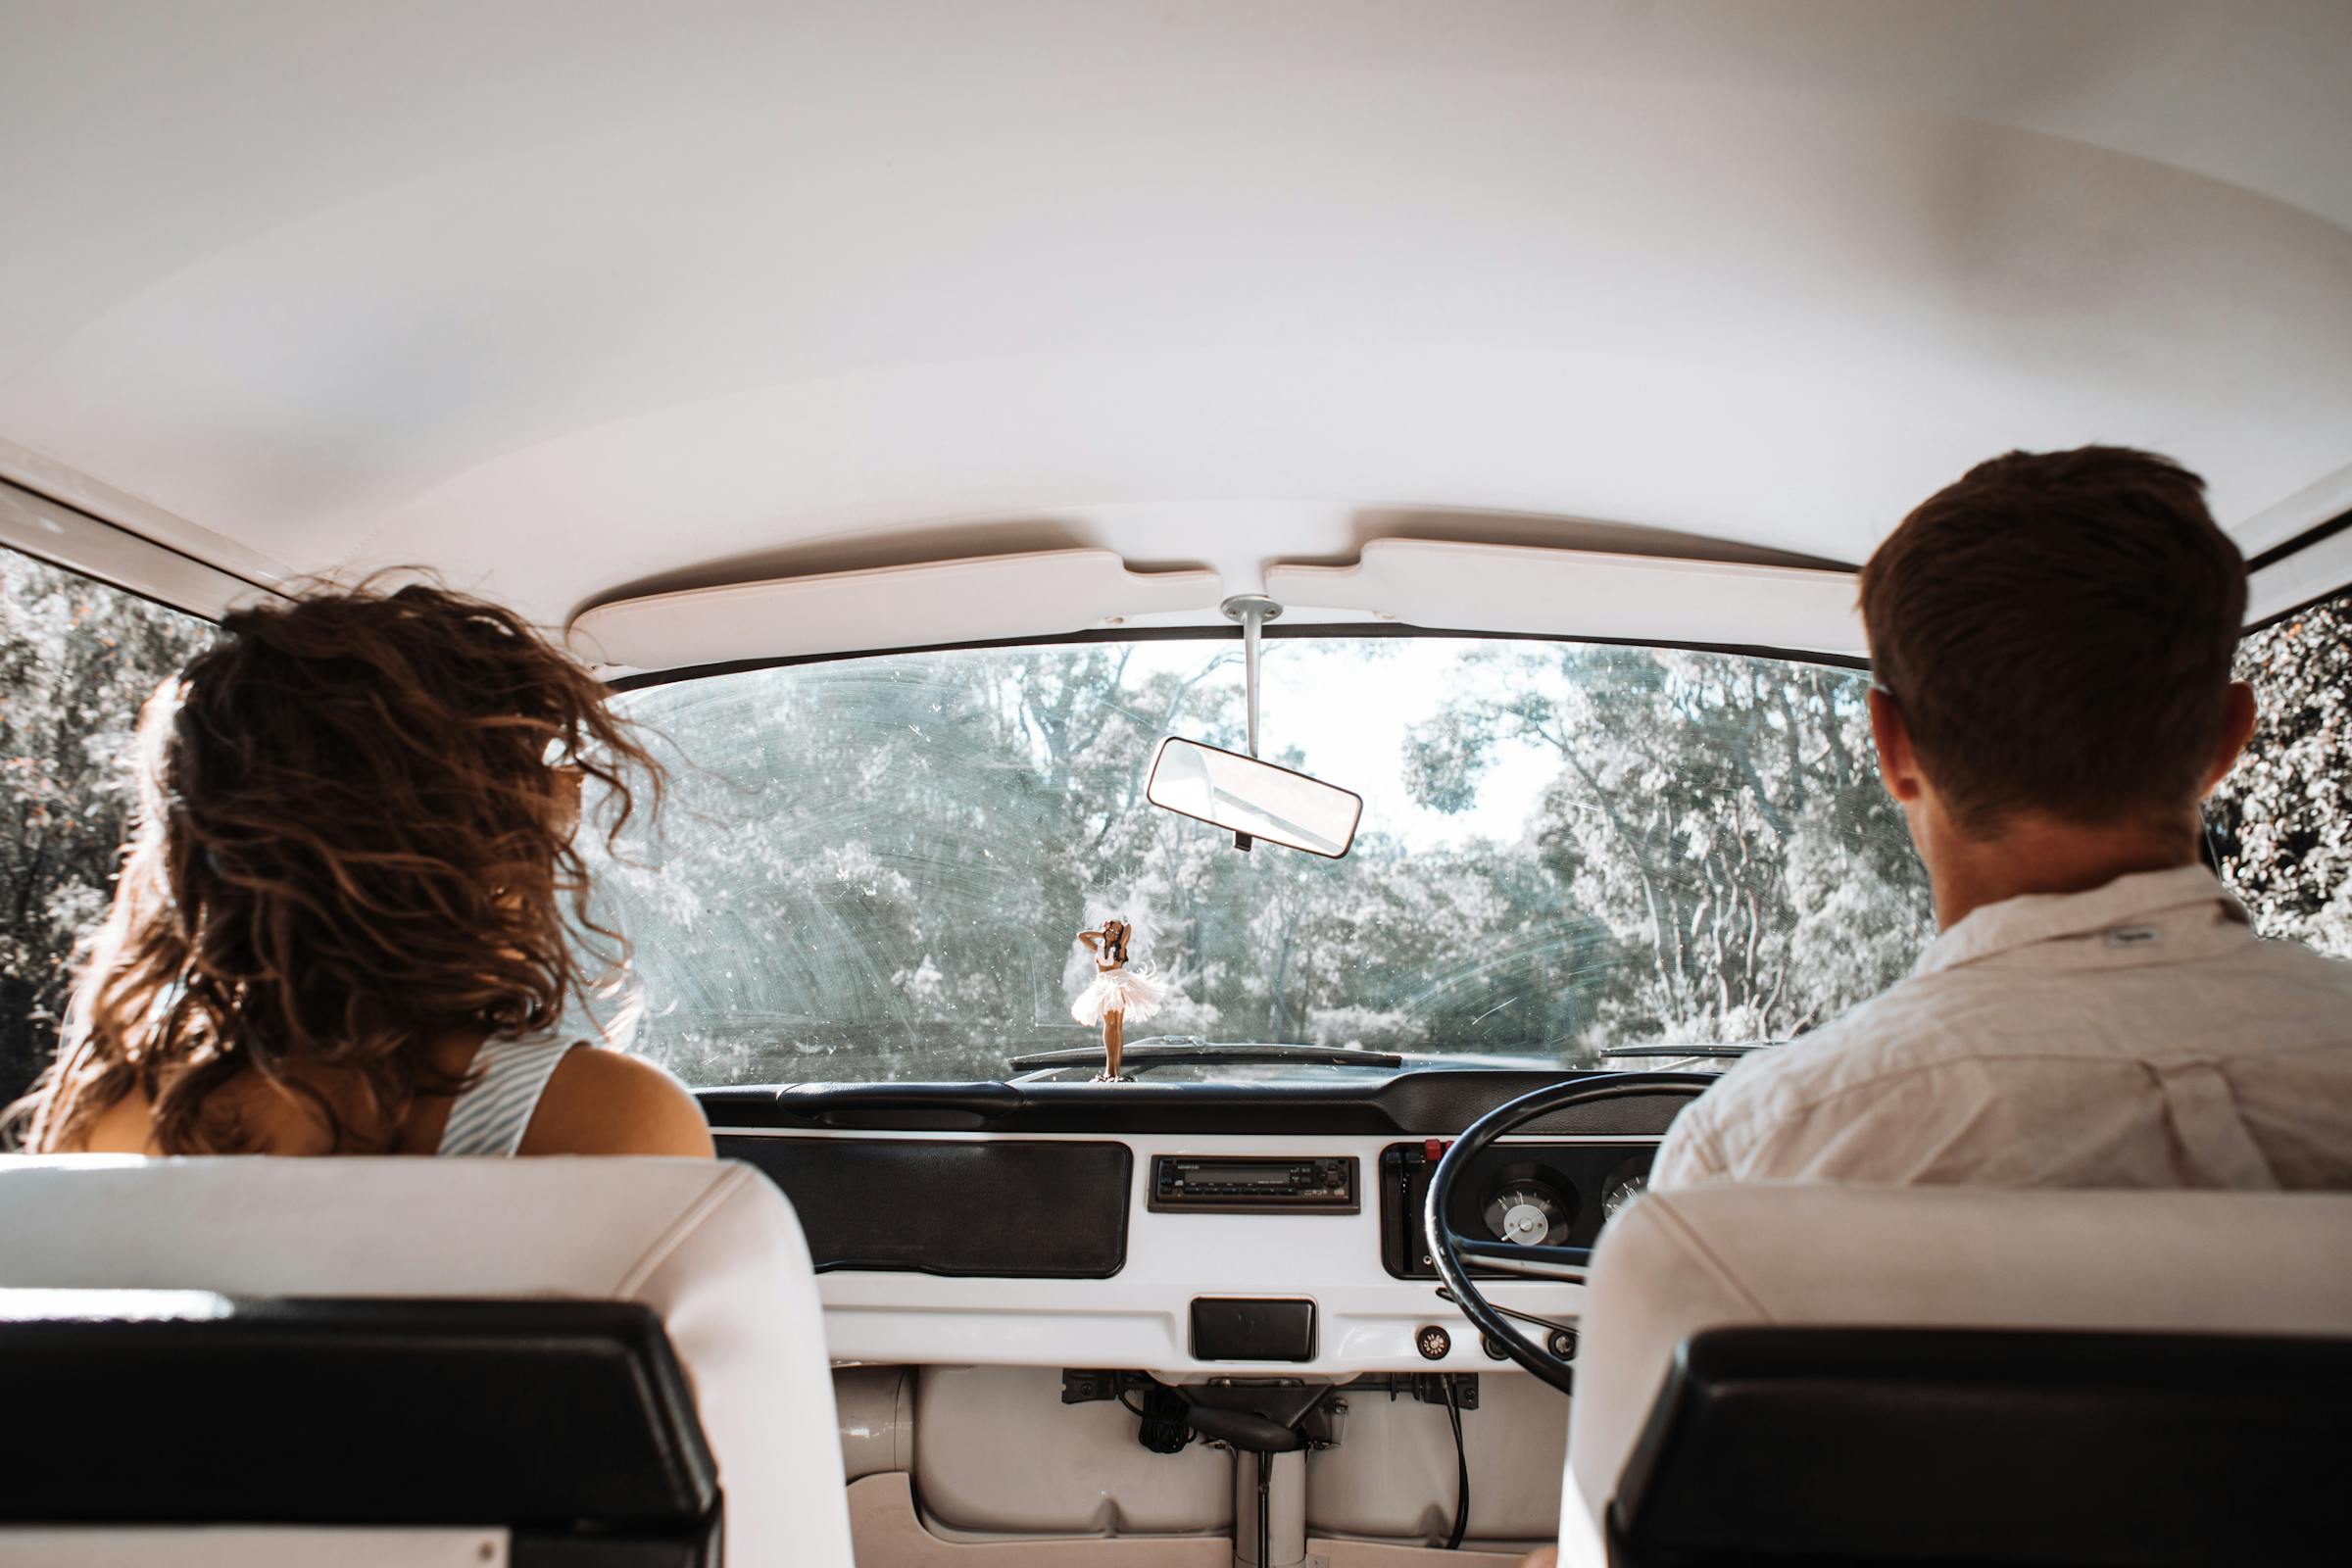 A man and a woman in a vintage car | Source: Pexels